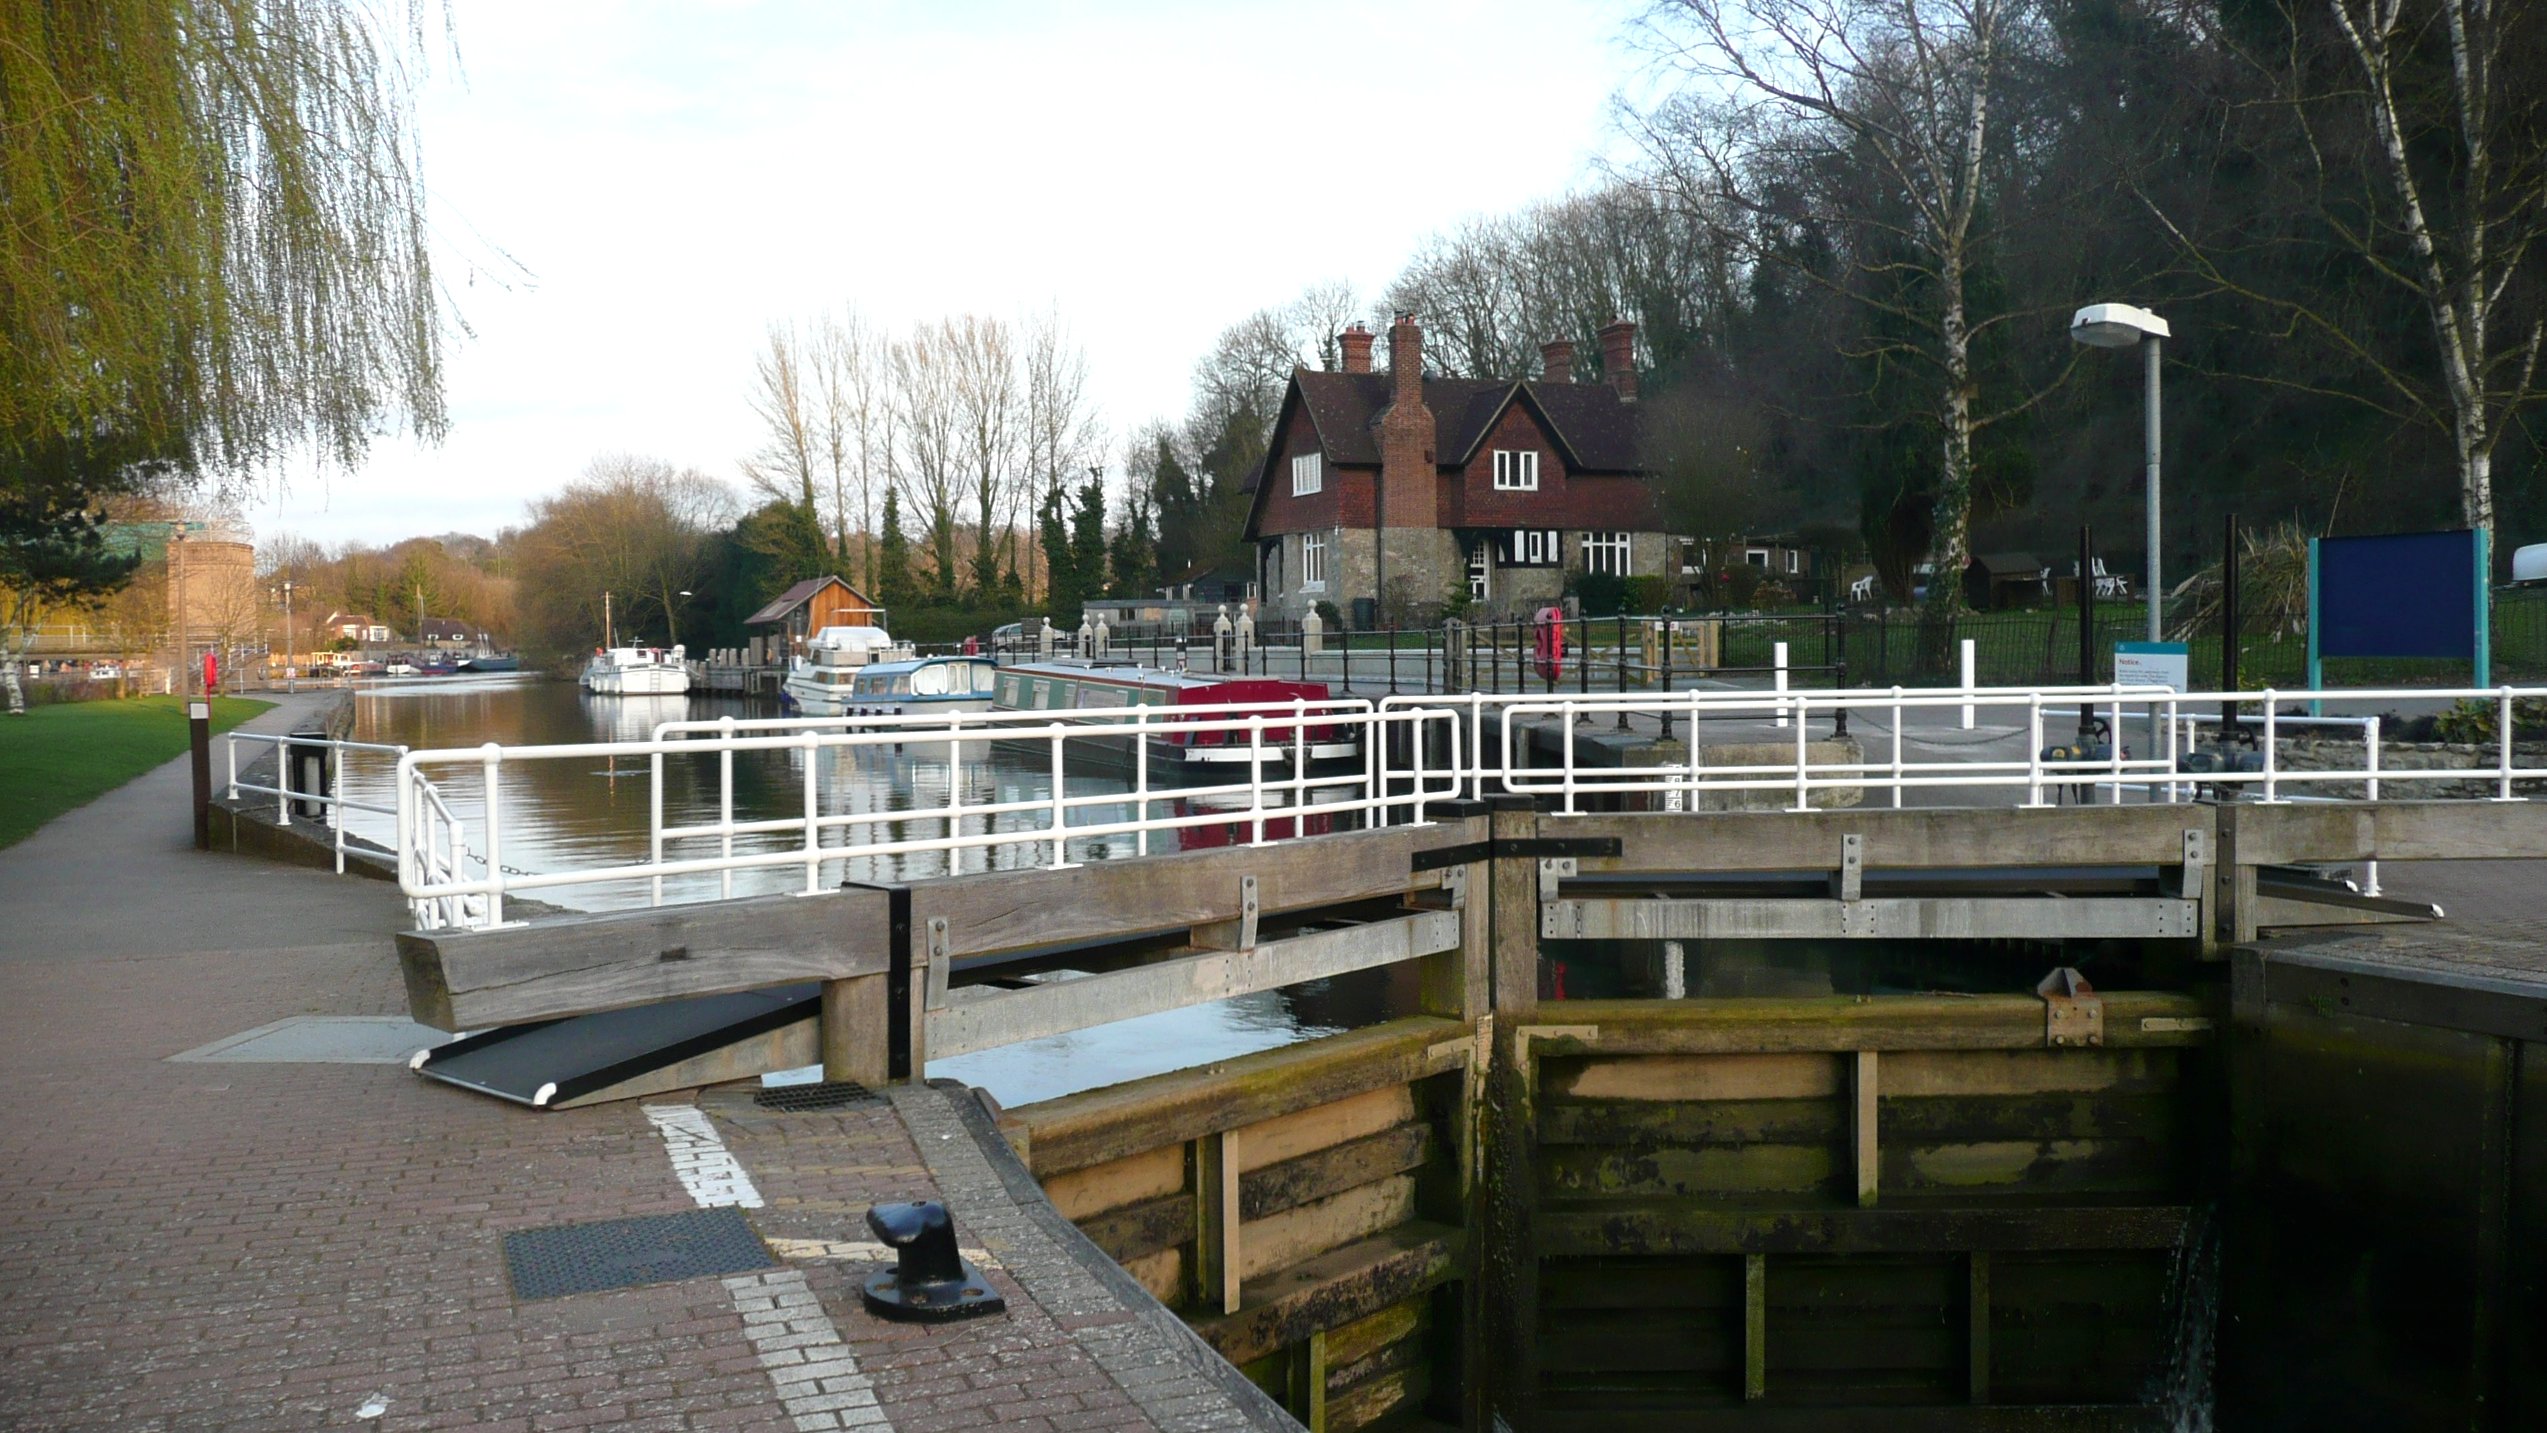 a view of the water and dock in this image